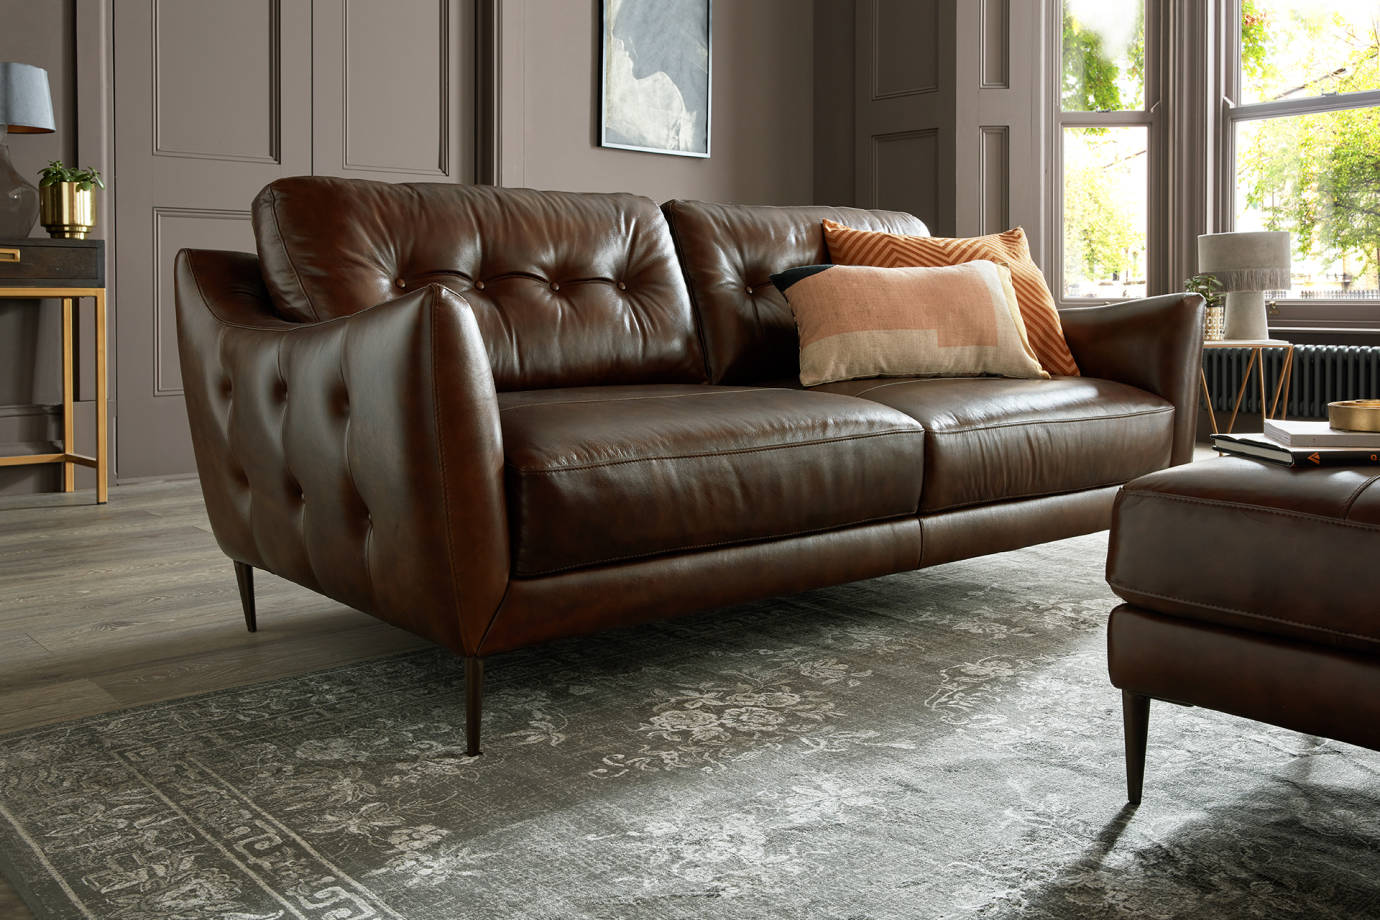 Leather Sofas Sofology, Comfy Leather Couch